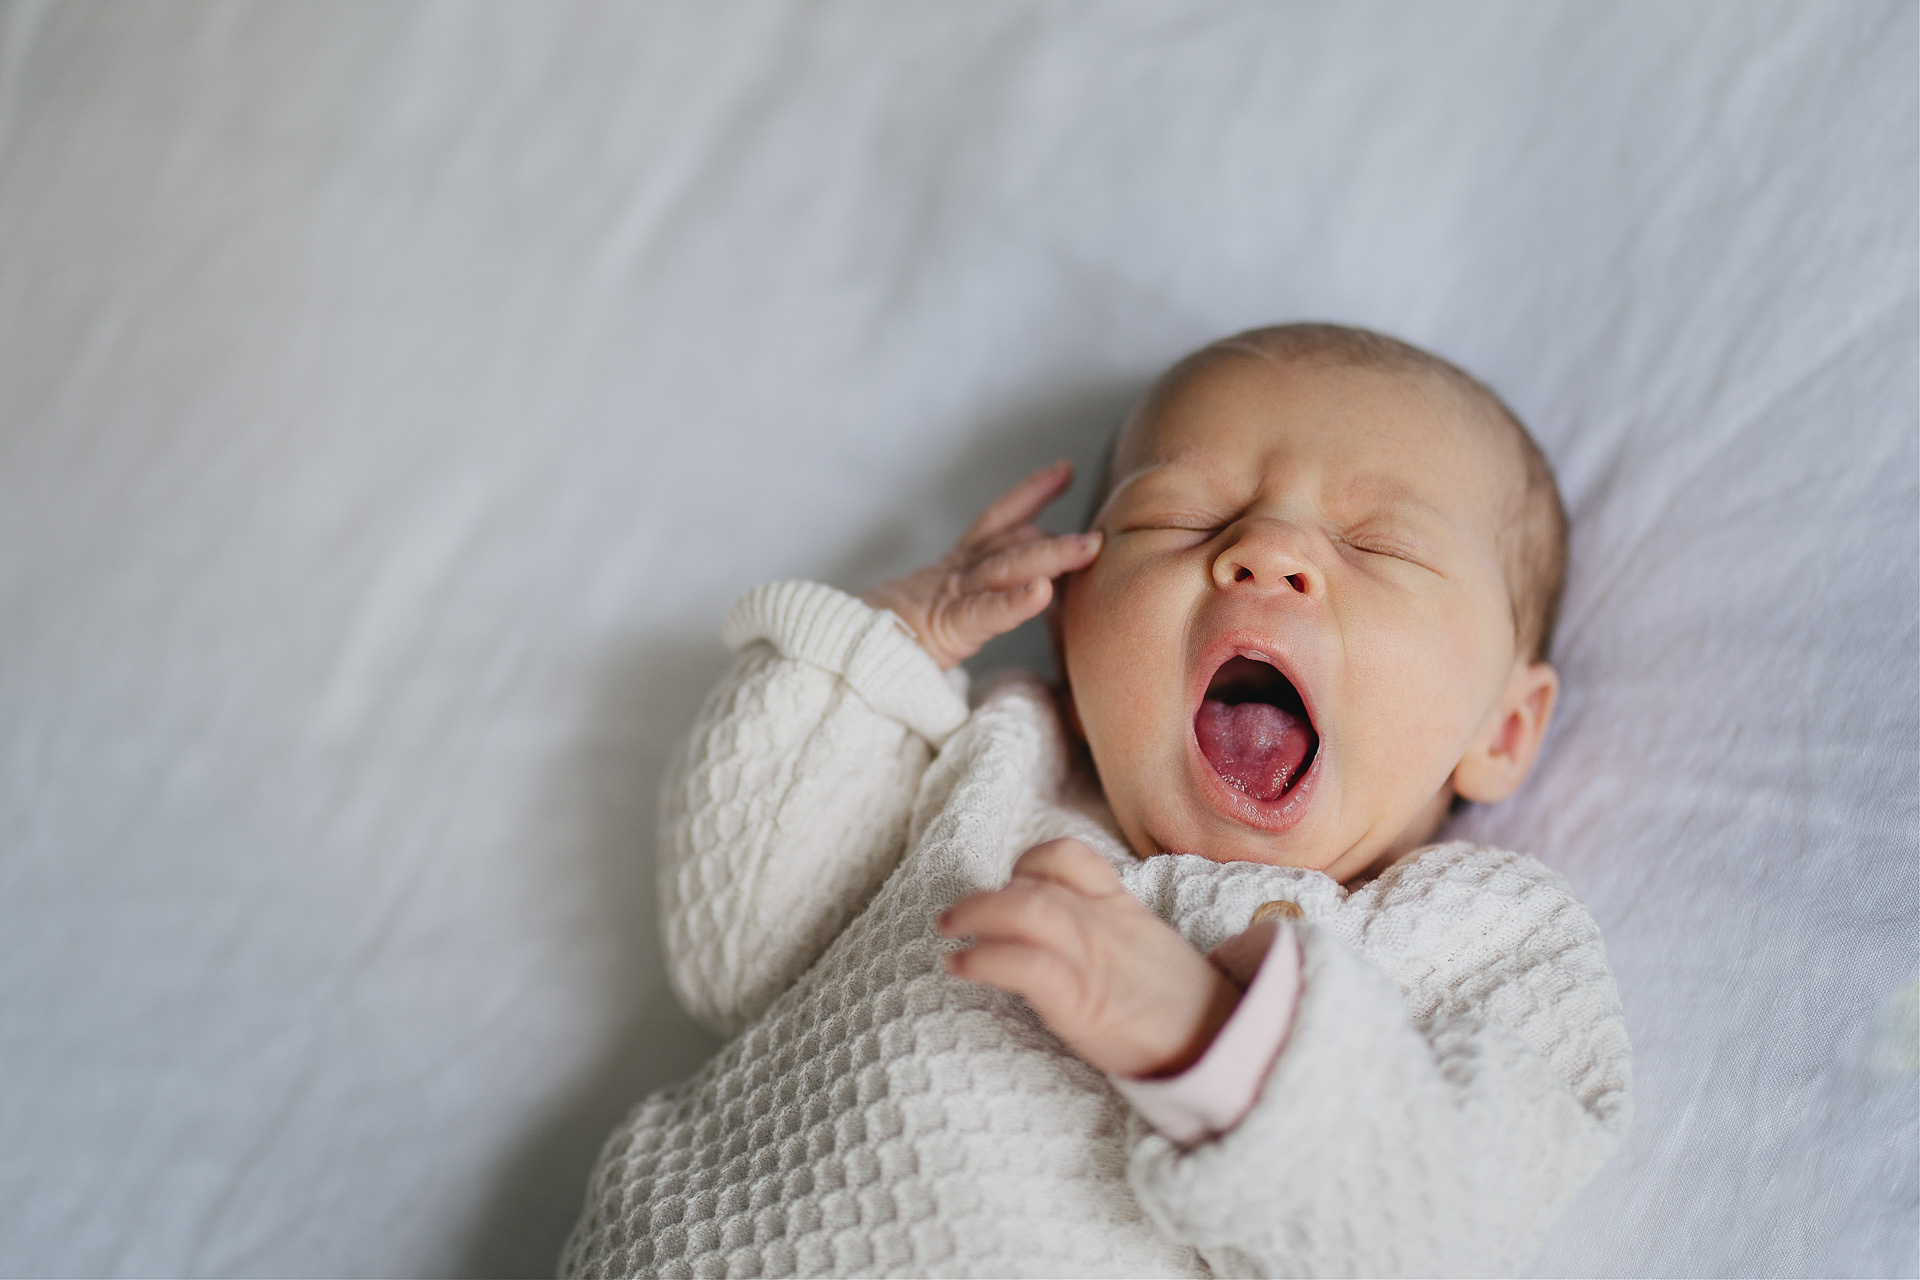 Family photography session at home: image of a baby yawning on a white bedcover